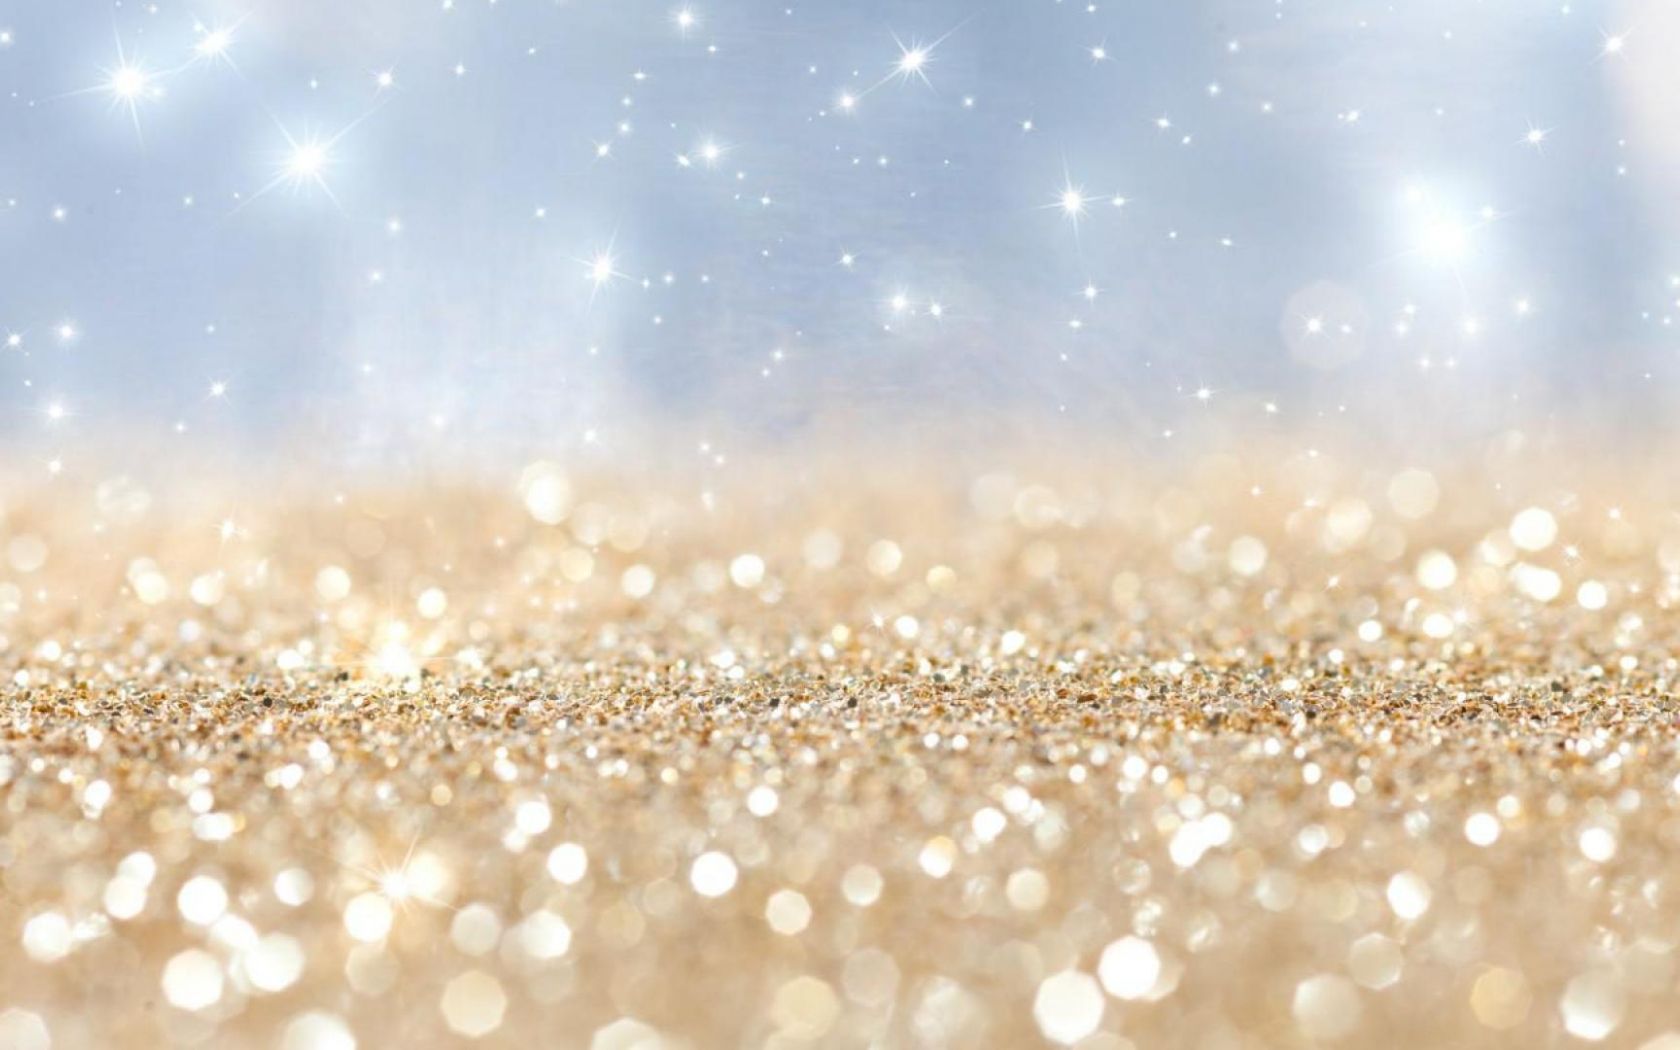 A close up of a golden glittery surface with a blue background - Glitter